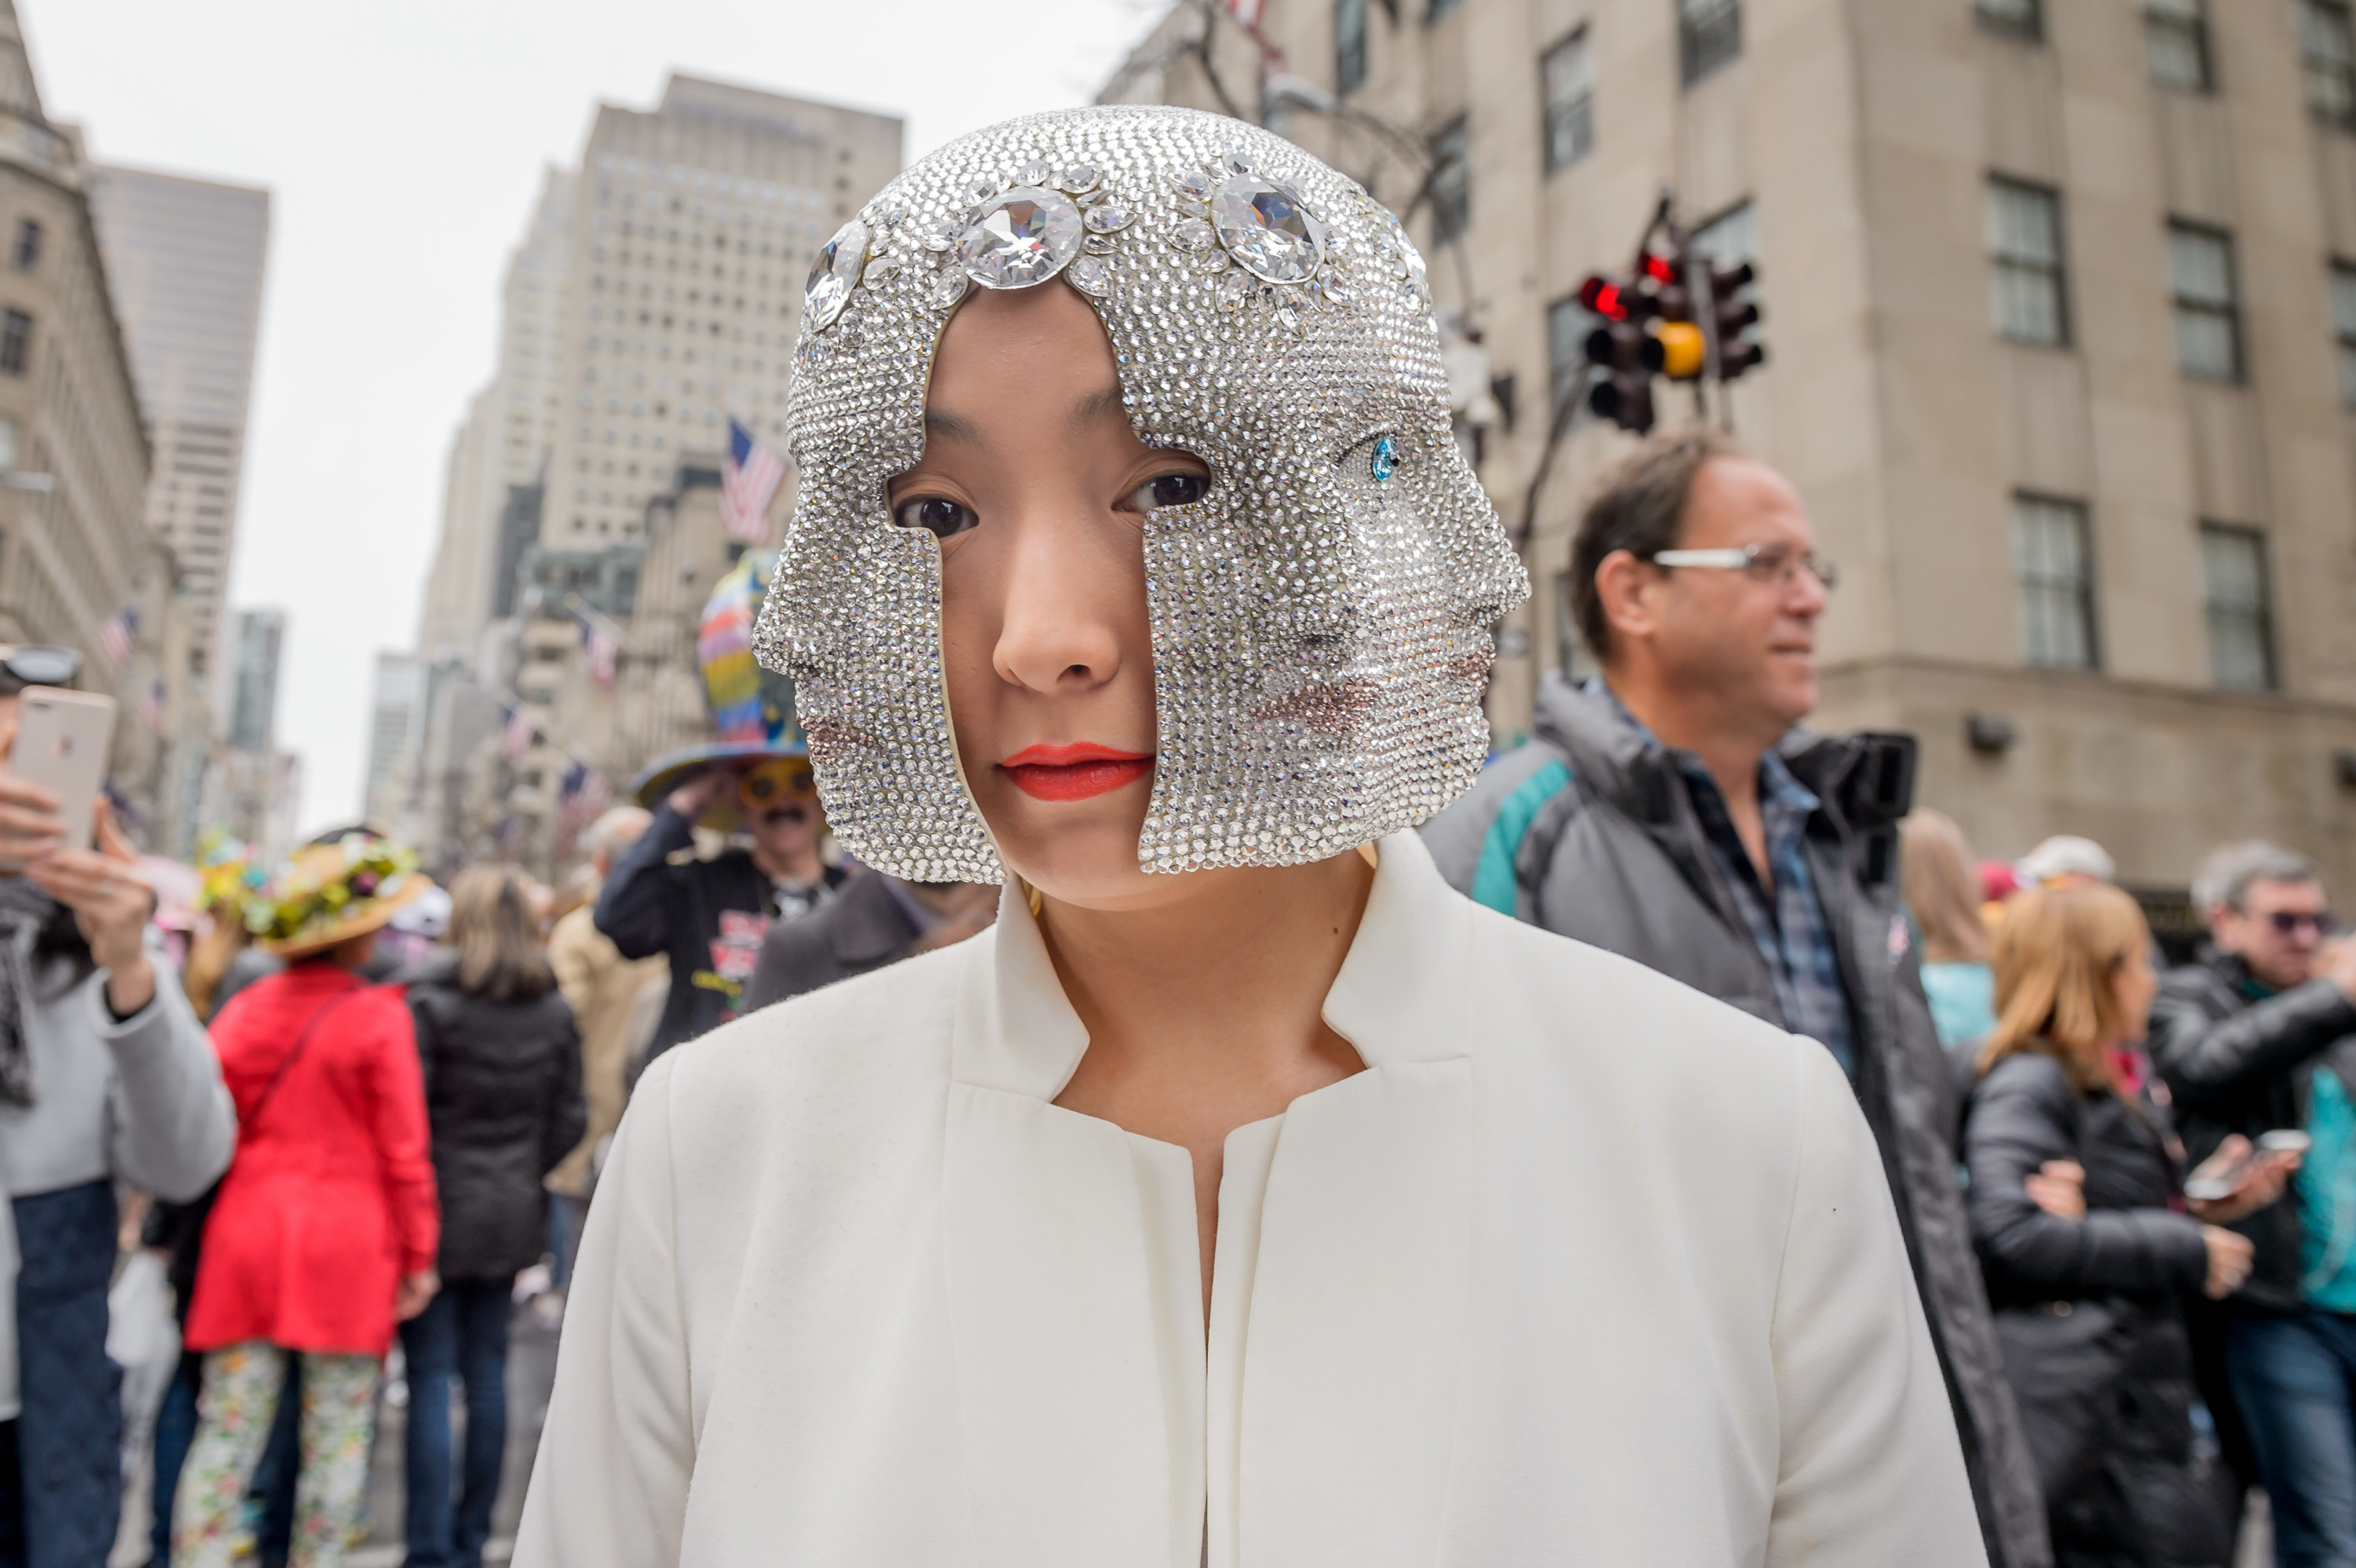 A woman wearing a silver embellished mask stands amid a crowd of people on the street